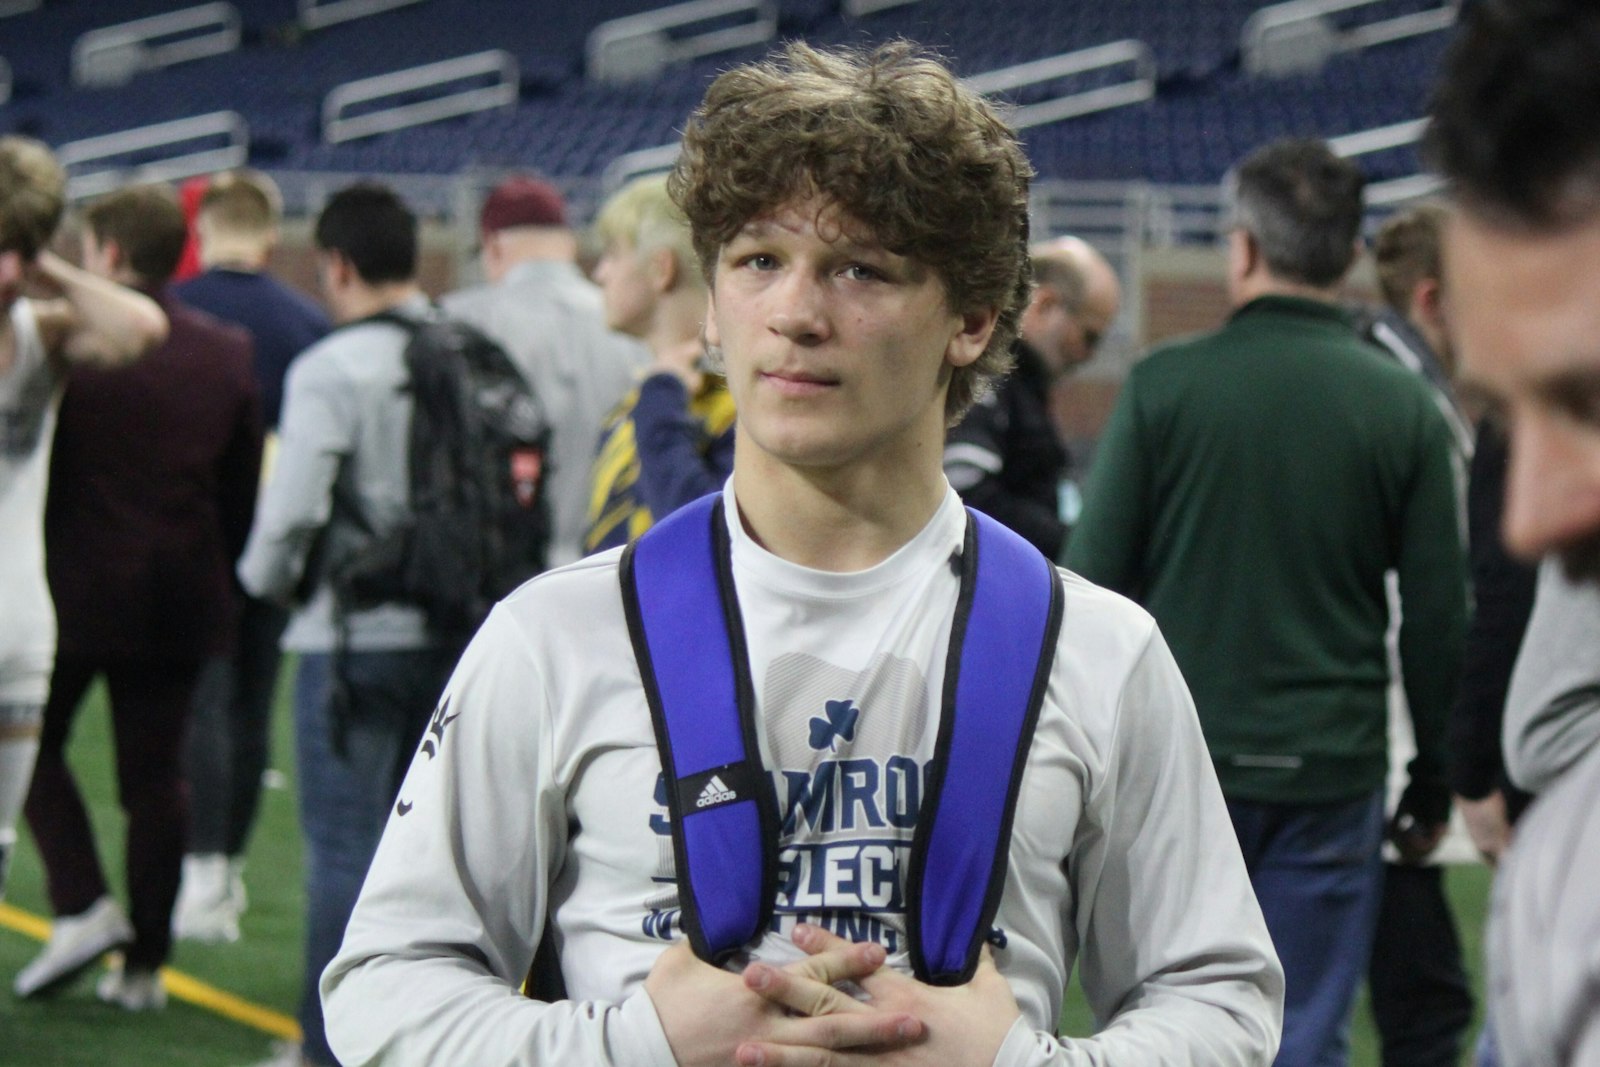 University of Michigan commit Dylan Gilcher capped an undefeated season by becoming the 32nd wrestler in state history to win a state championship in each of his four seasons. Gilcher won the 150-pound match with a 20-4 technical fall over Brighton’s Travis Richardson.